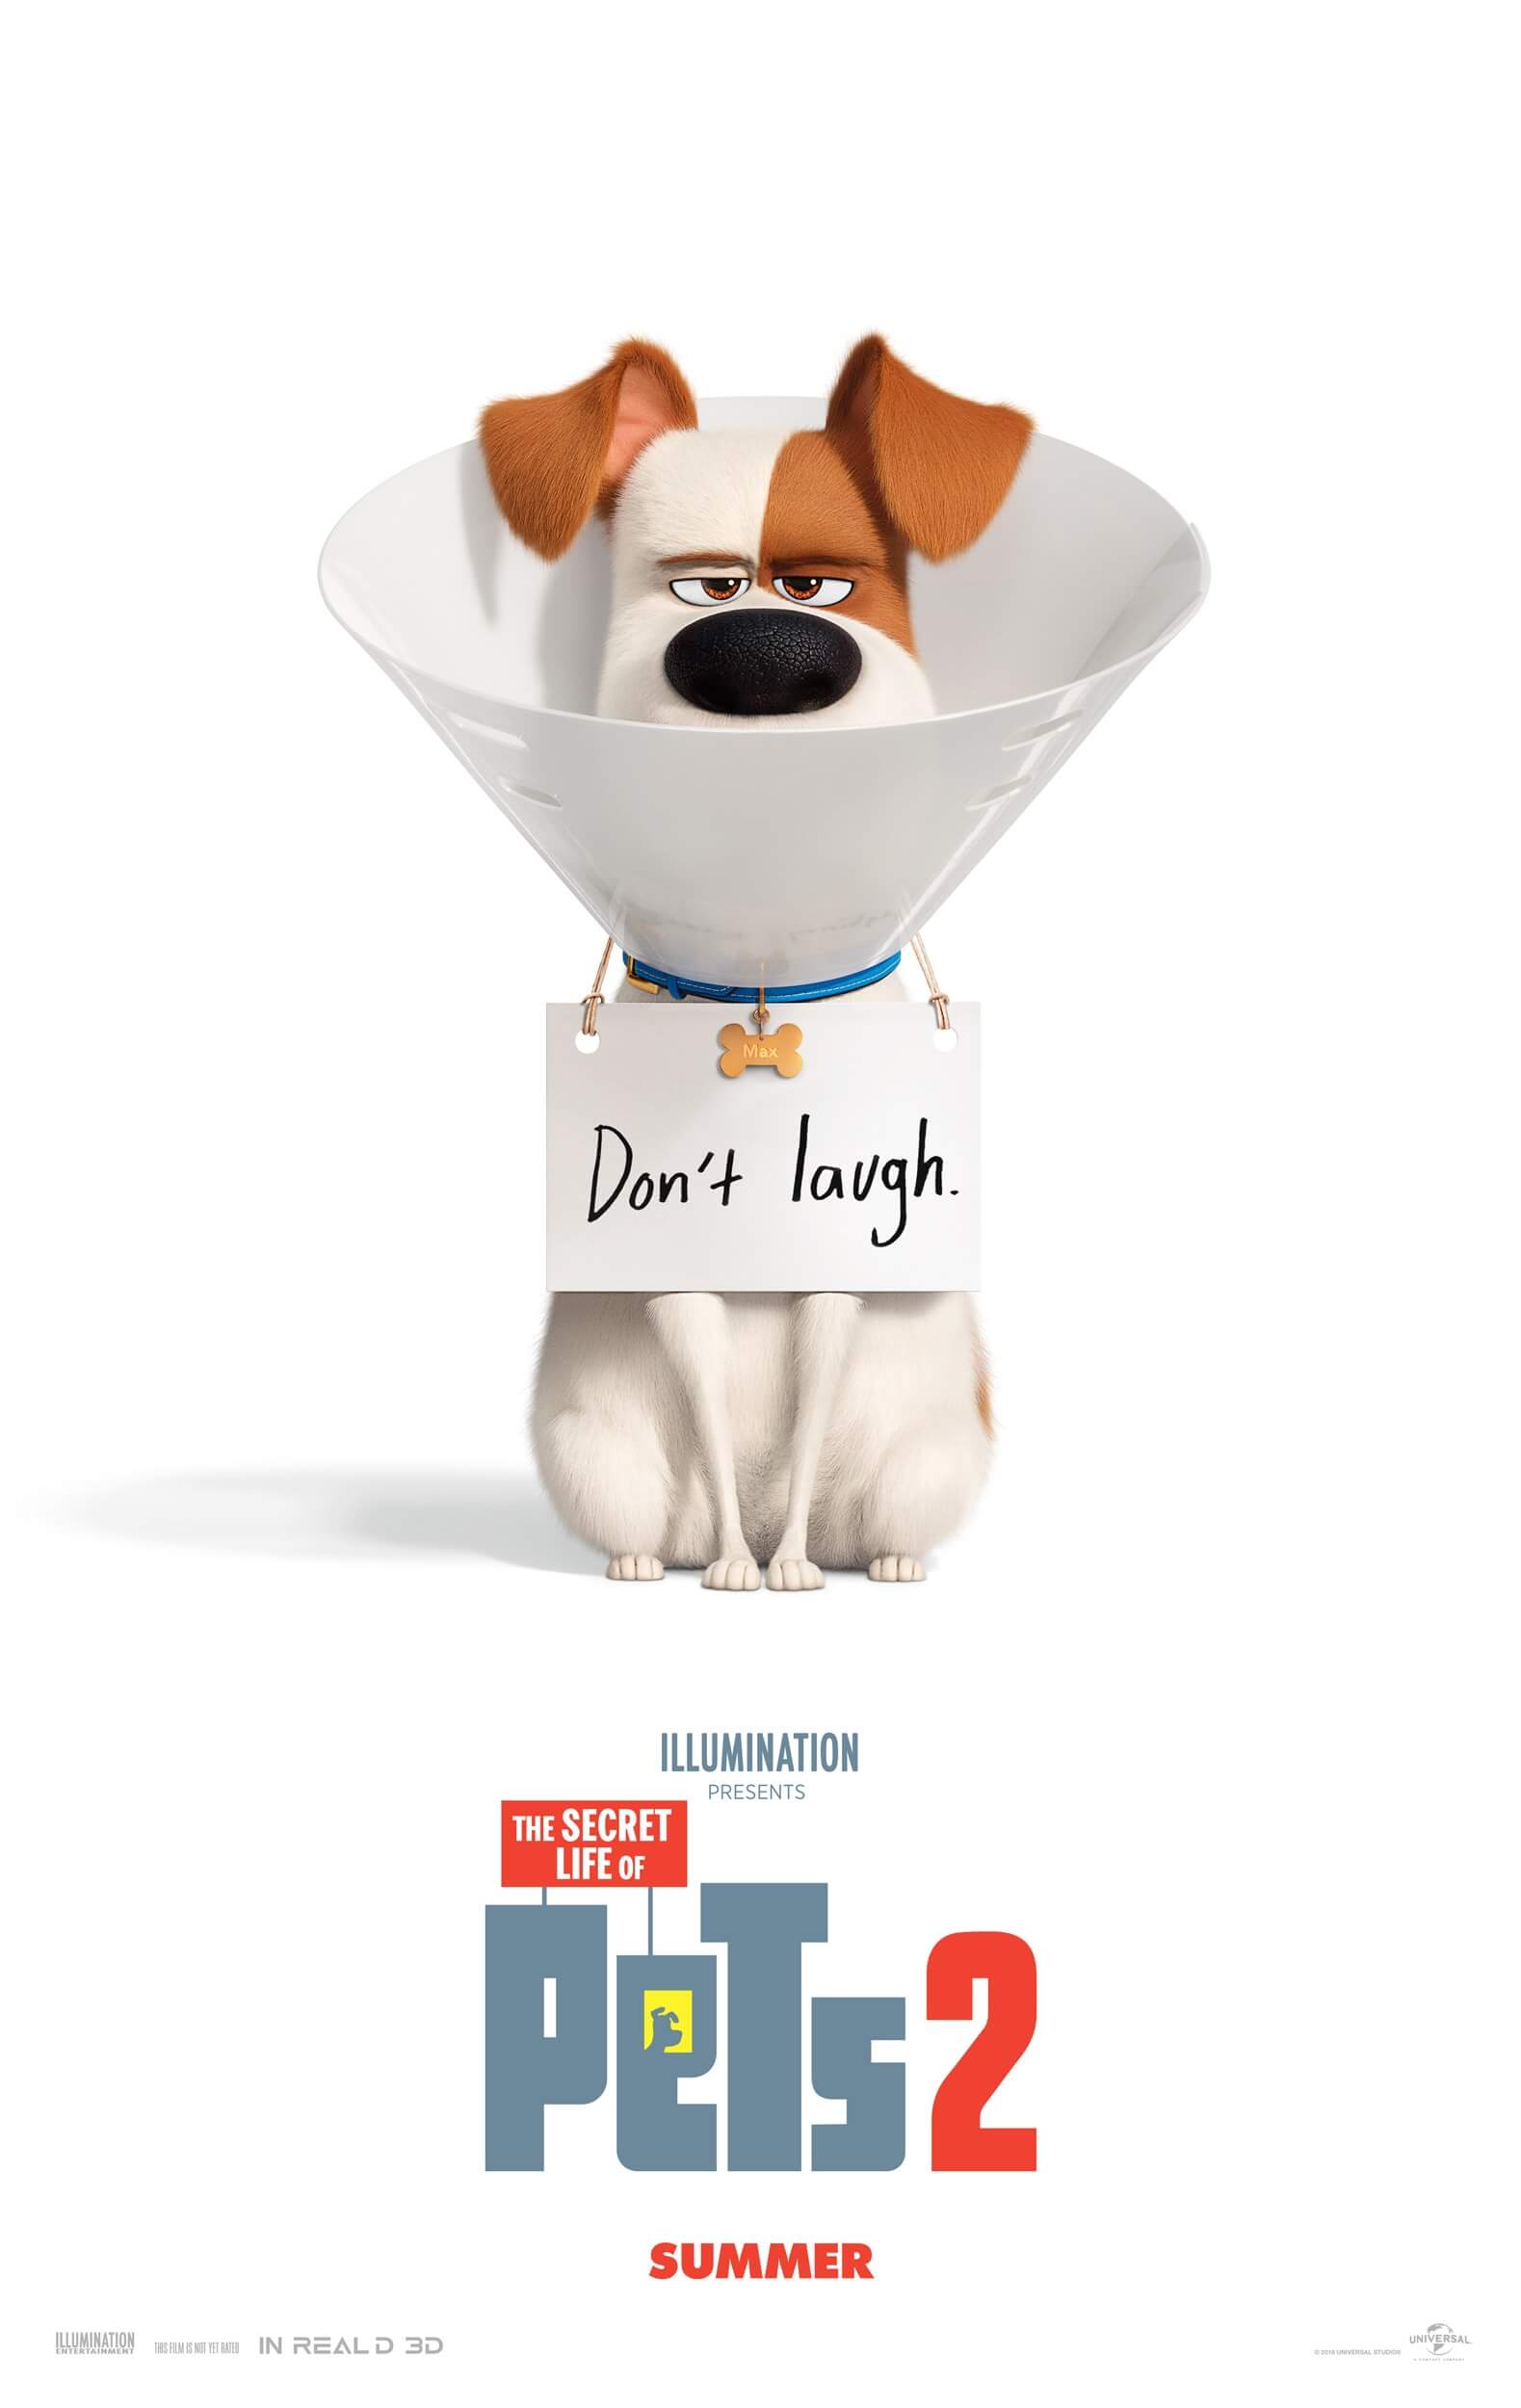 The Secret Life of Pets 2 offical poster